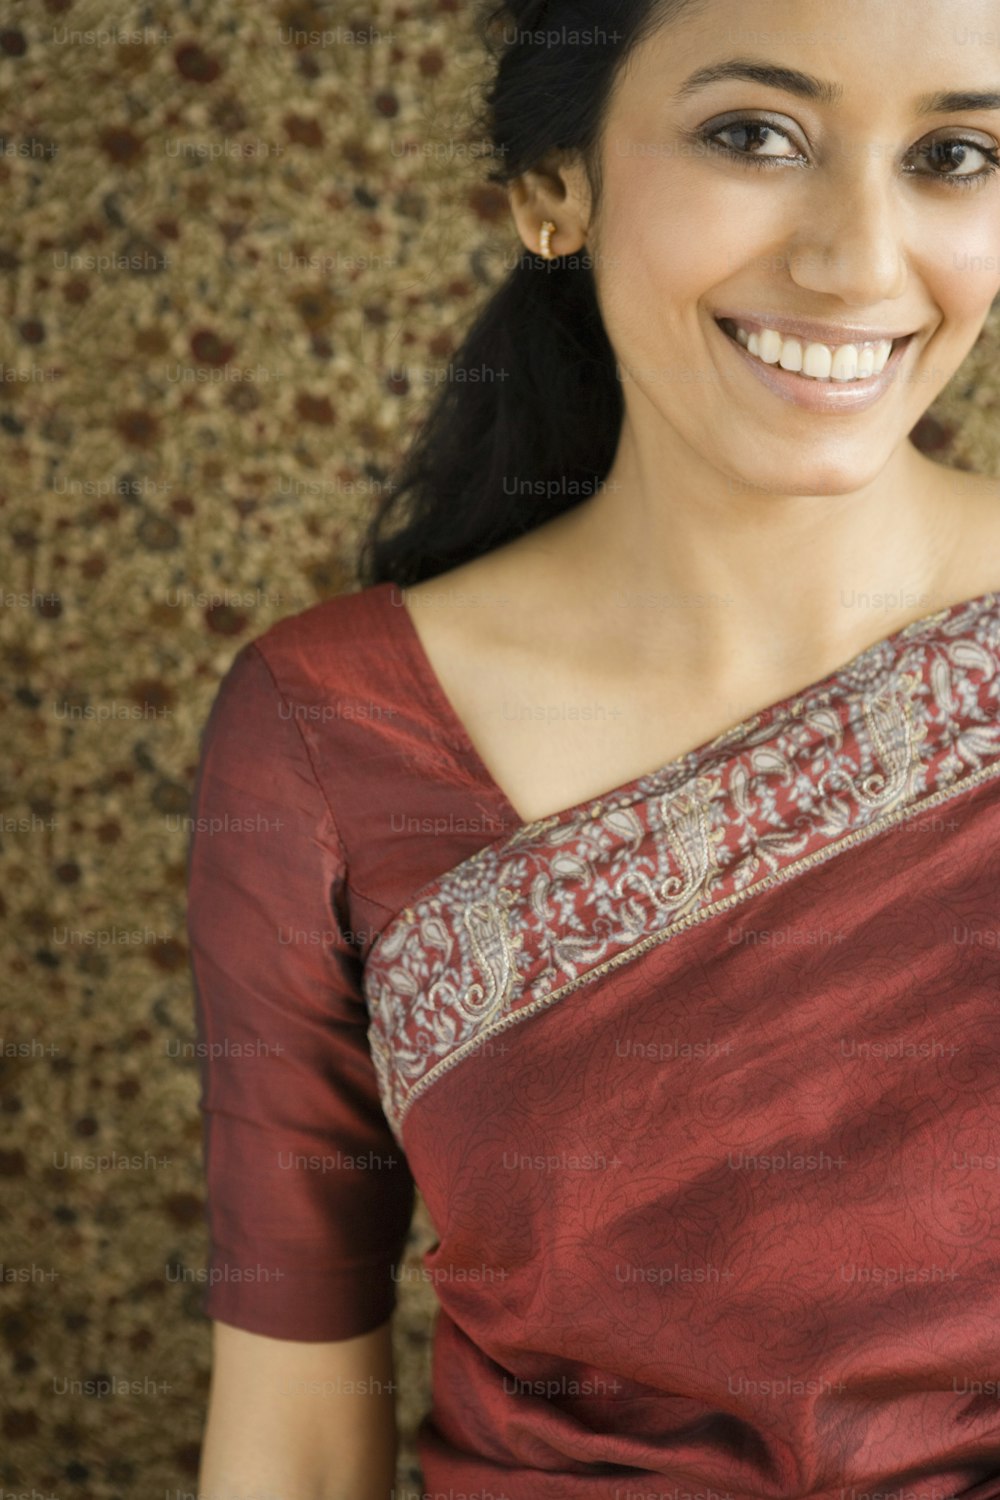 a woman in a red sari smiling at the camera